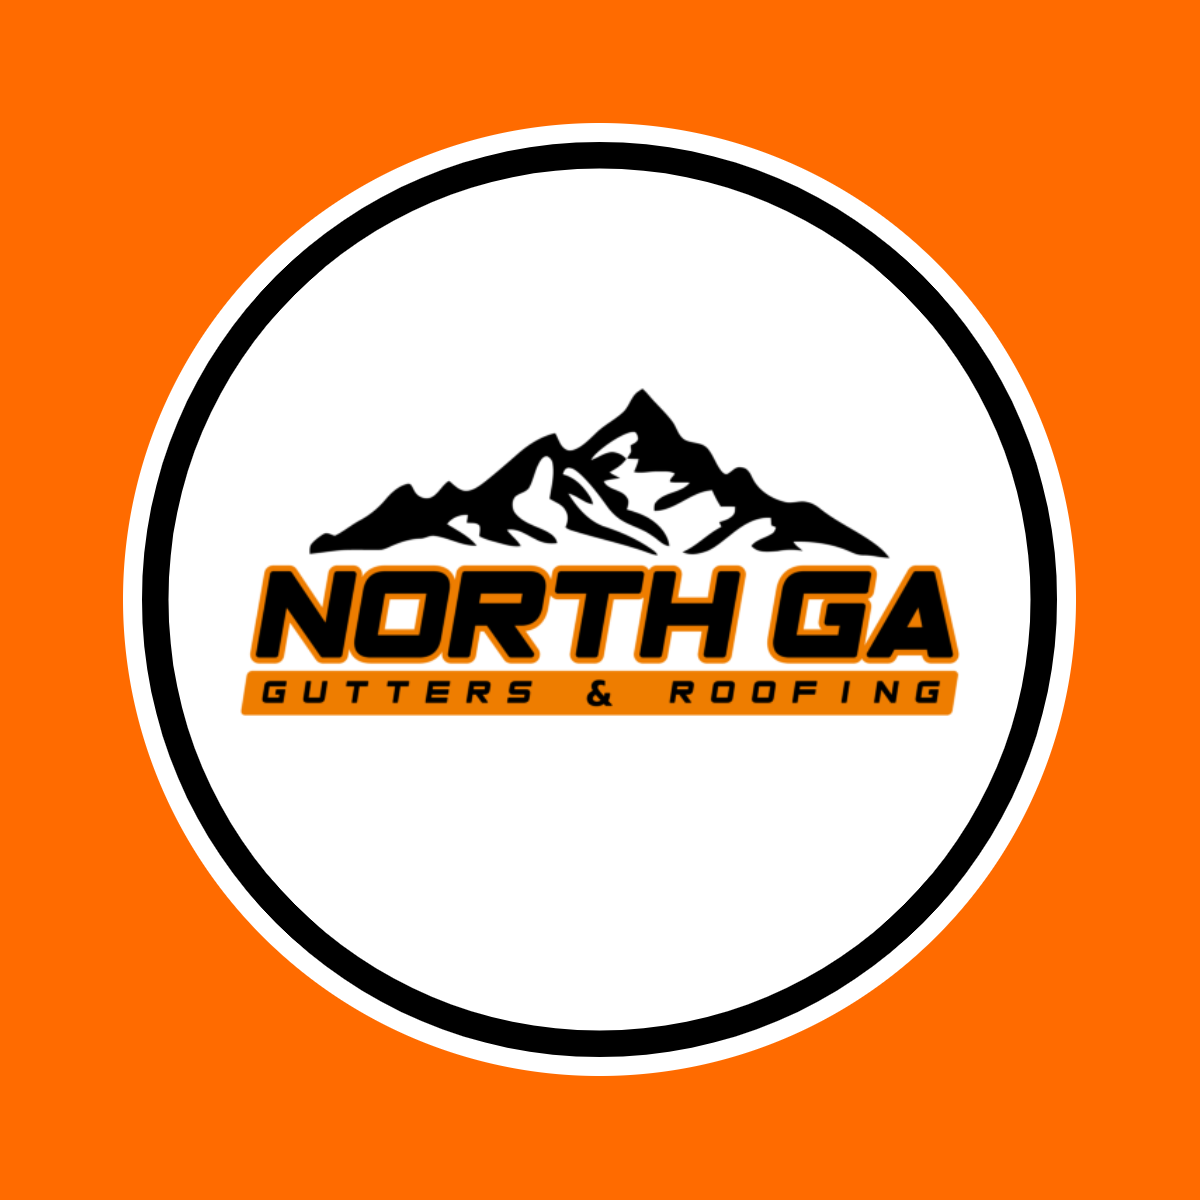 North Georgia Gutters & Roofing LLC